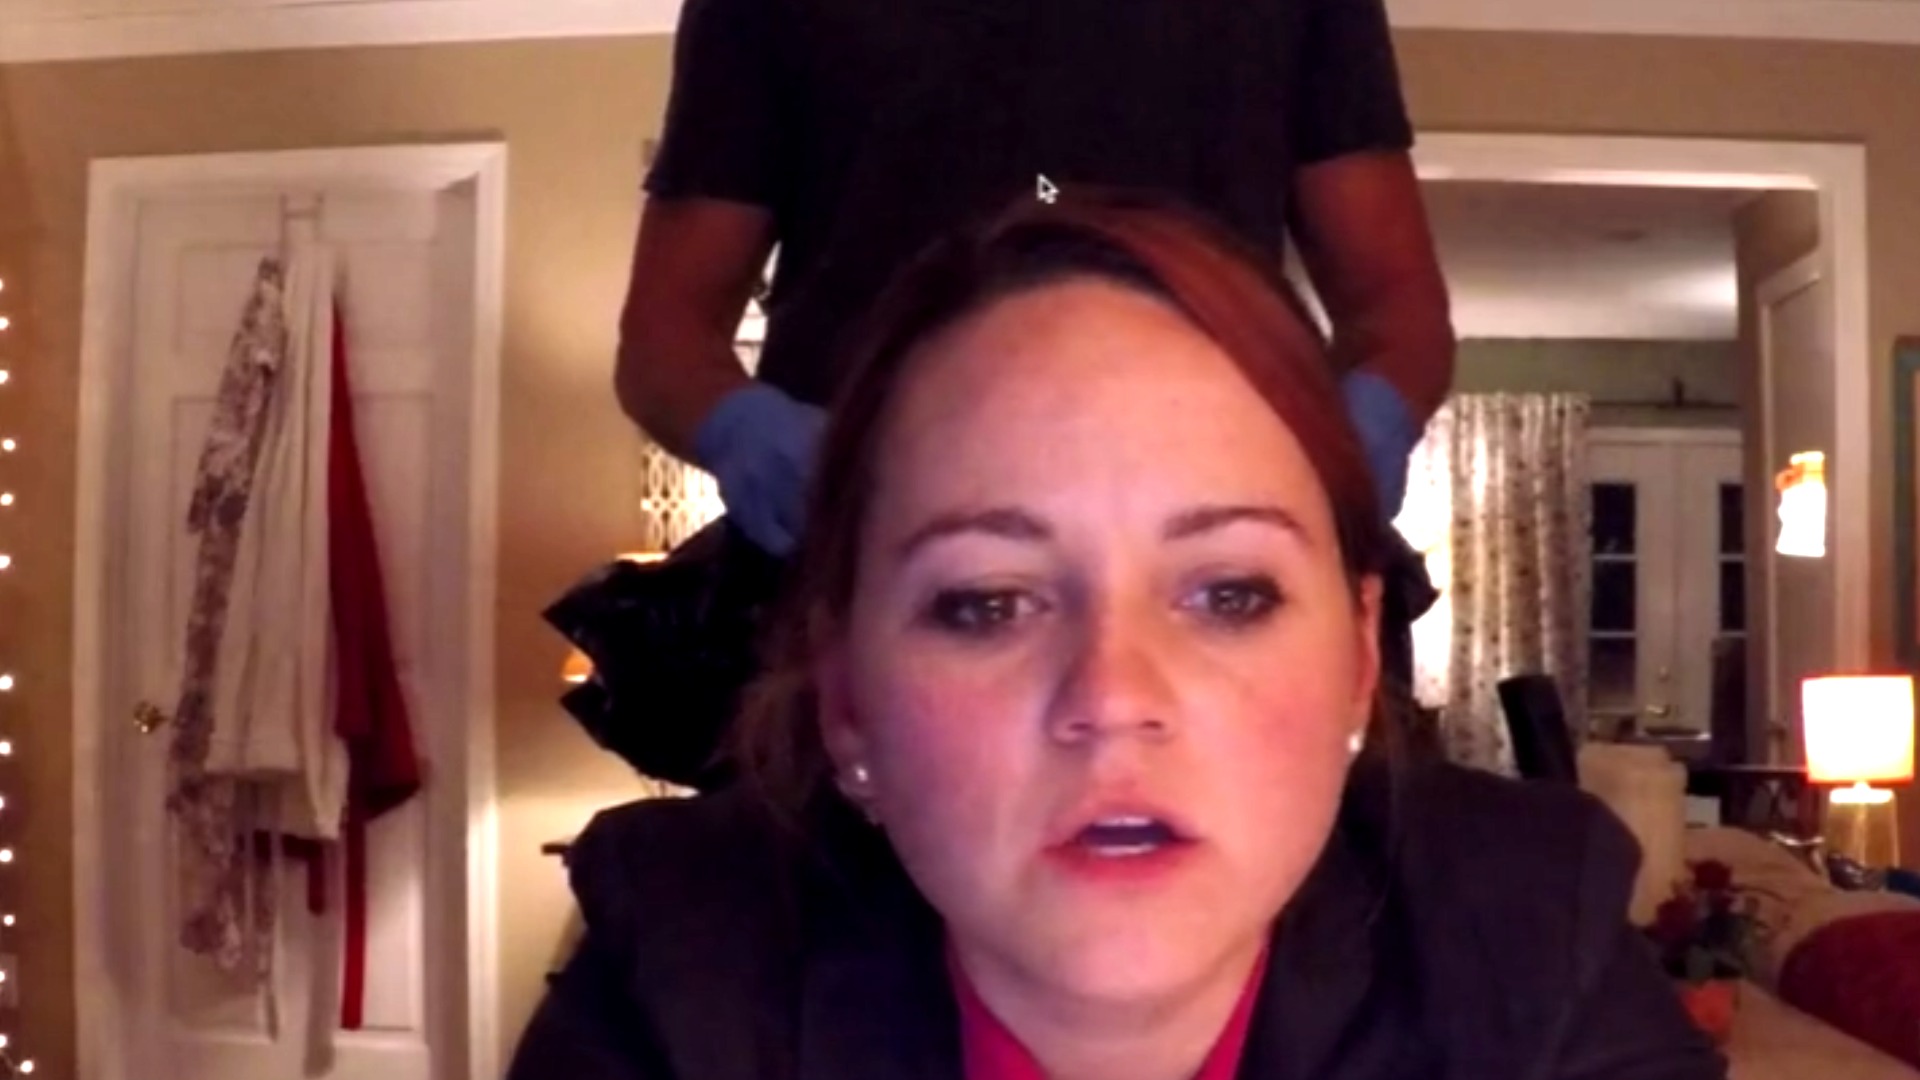 Unfriended Dark Web Official Clip Strangled To Death Trailers